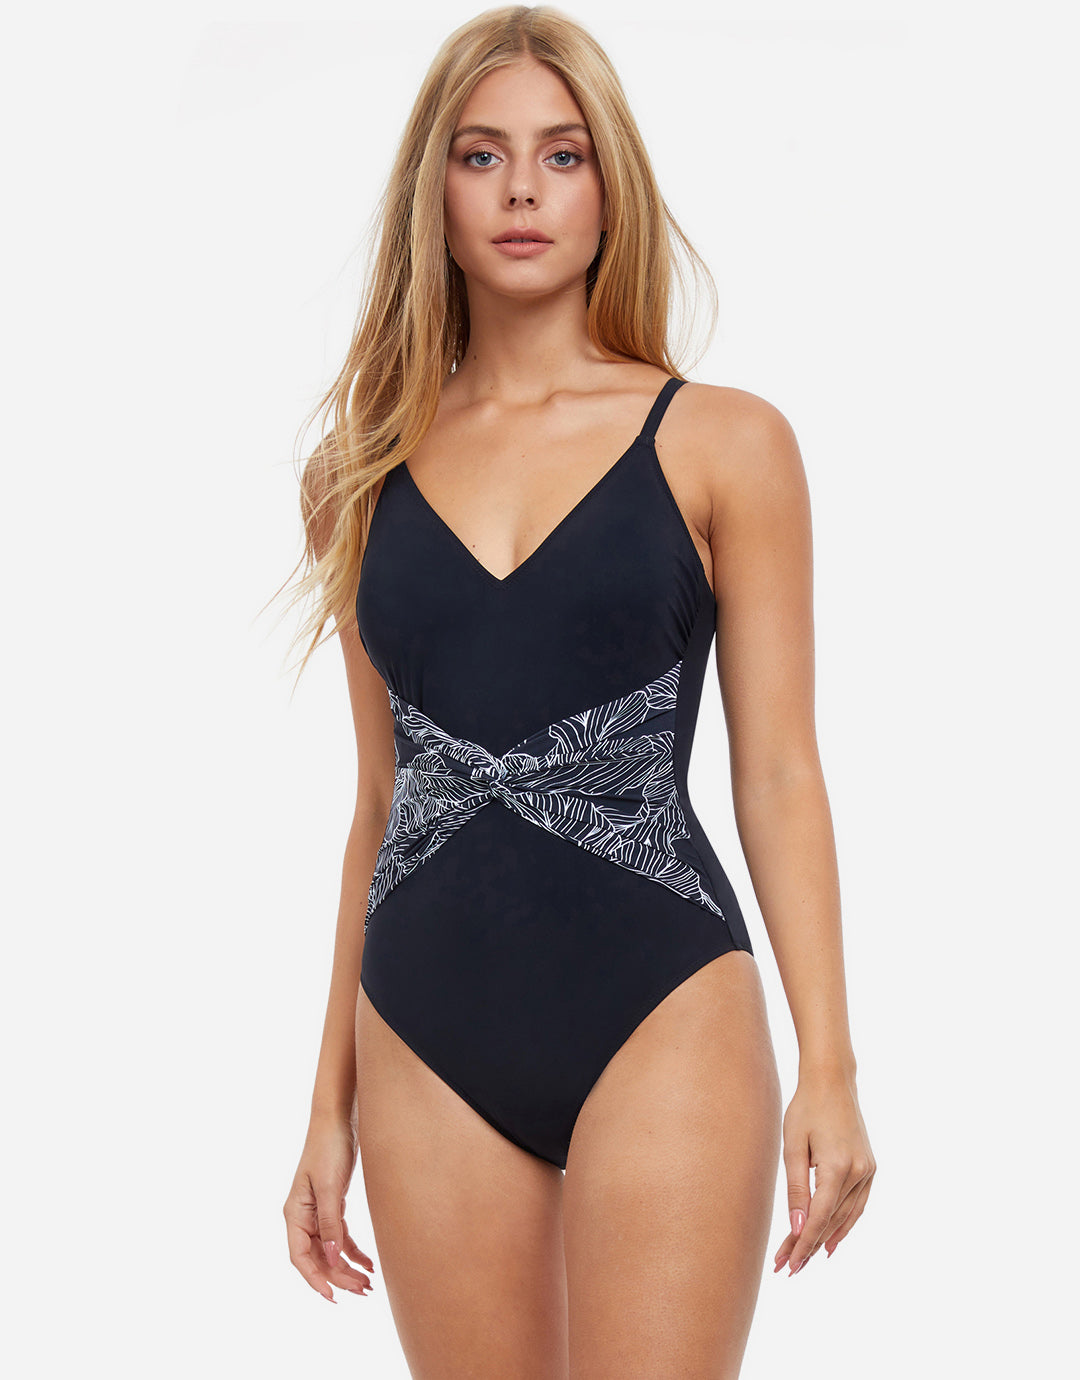 Profile Soiree D Cup Swimsuit - Black/White - Simply Beach UK